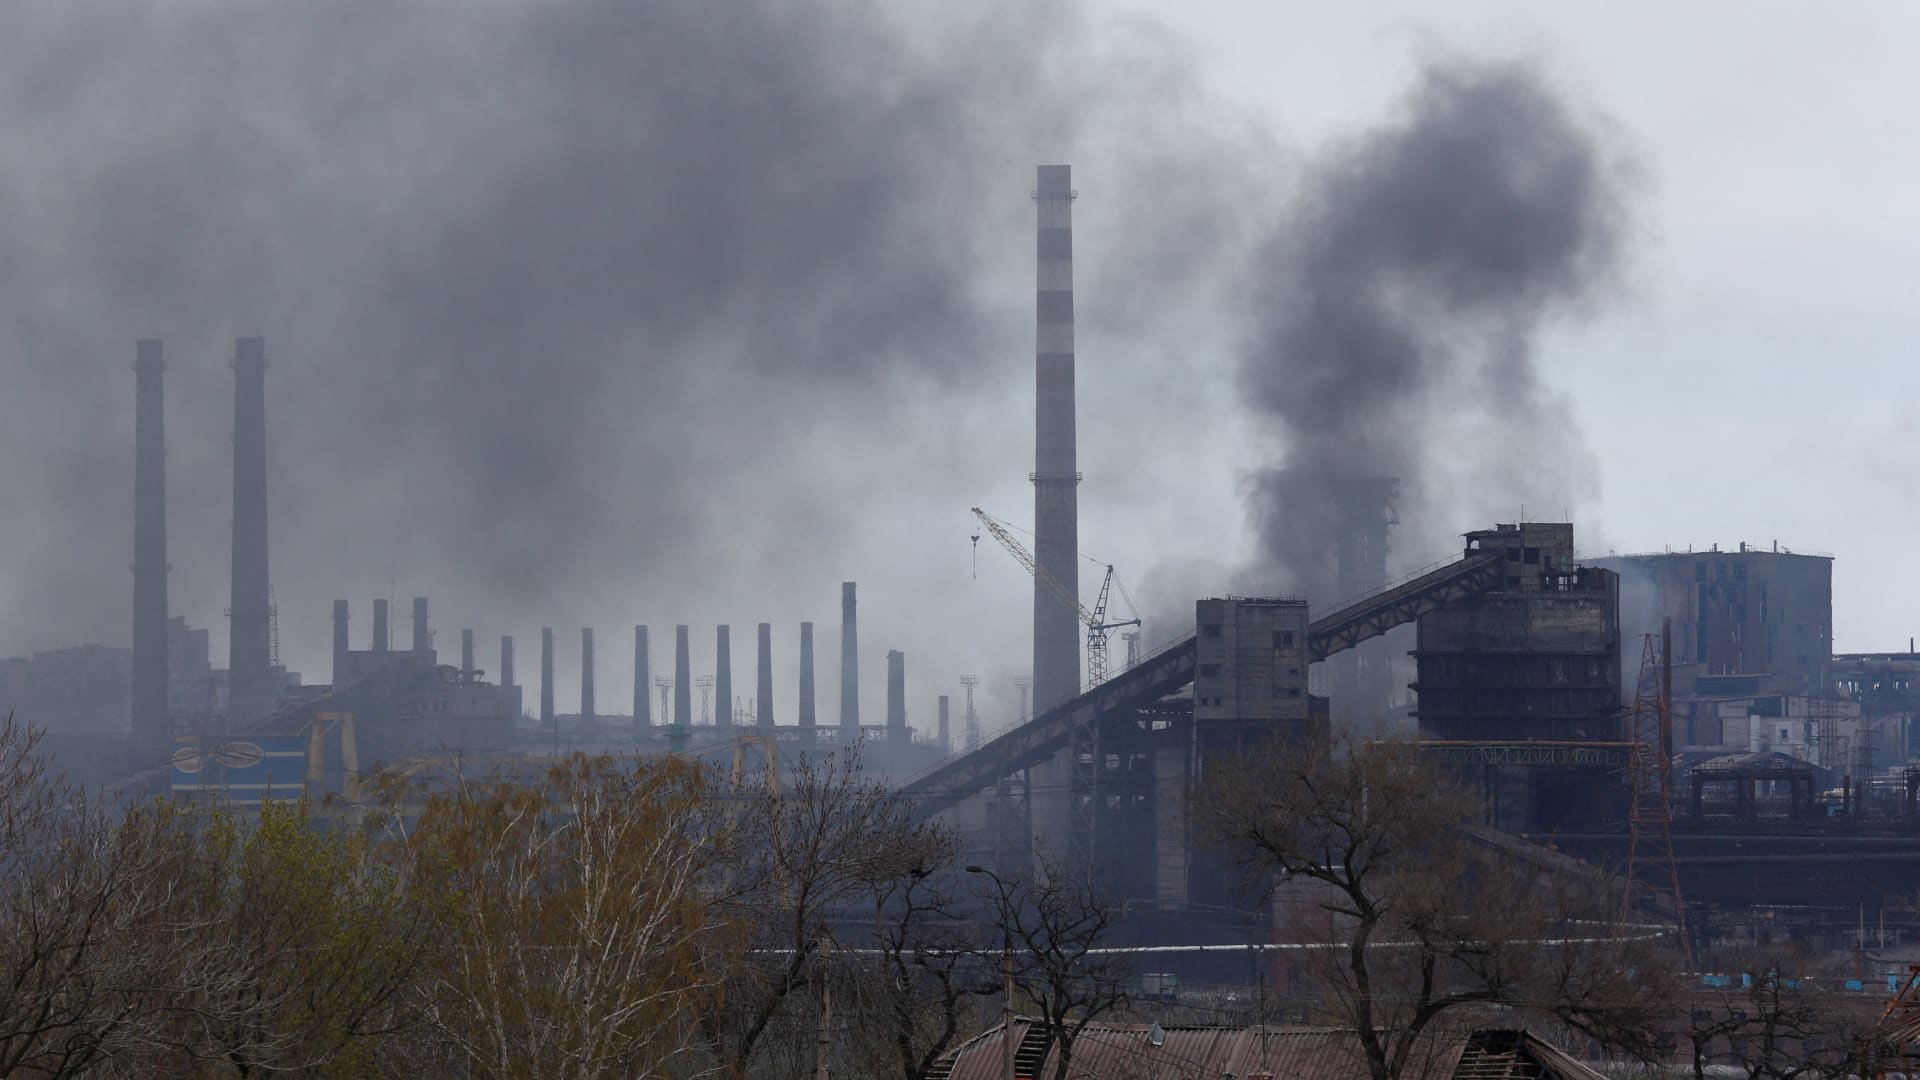 Smoke rises above a plant of Azovstal Iron and Steel Works during Ukraine-Russia conflict in the southern port city of Mariupol, Ukraine April 21, 2022.